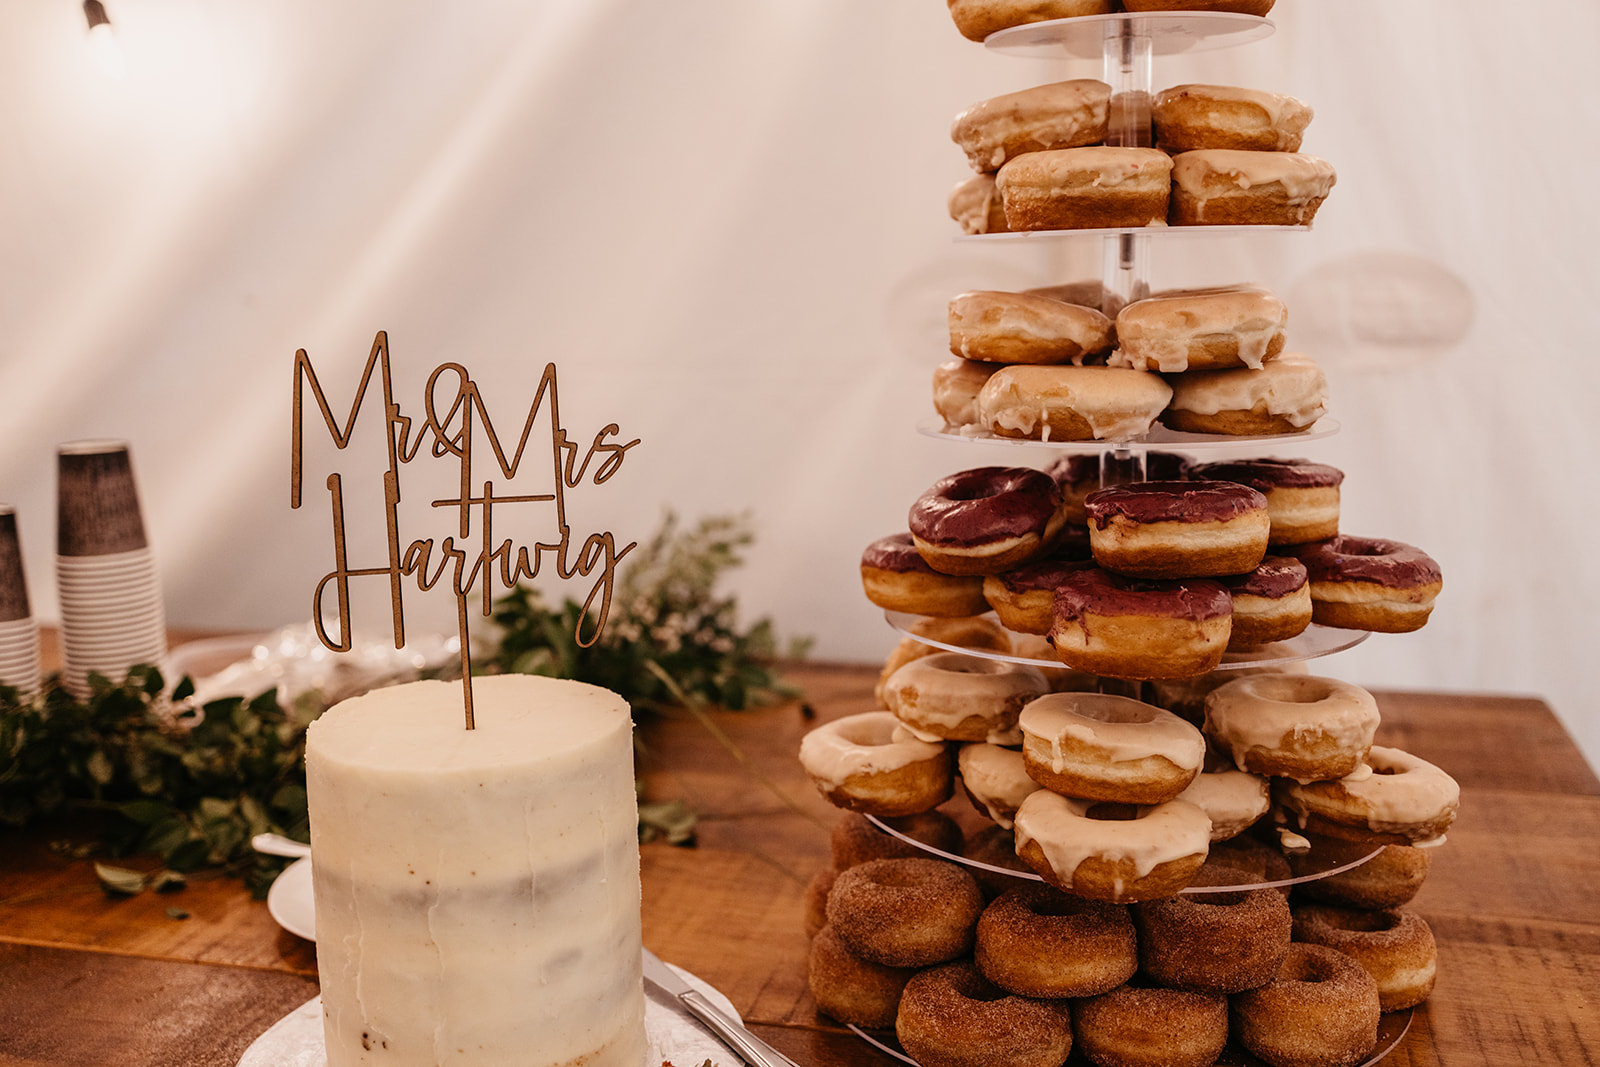 Wedding cake and donut tower